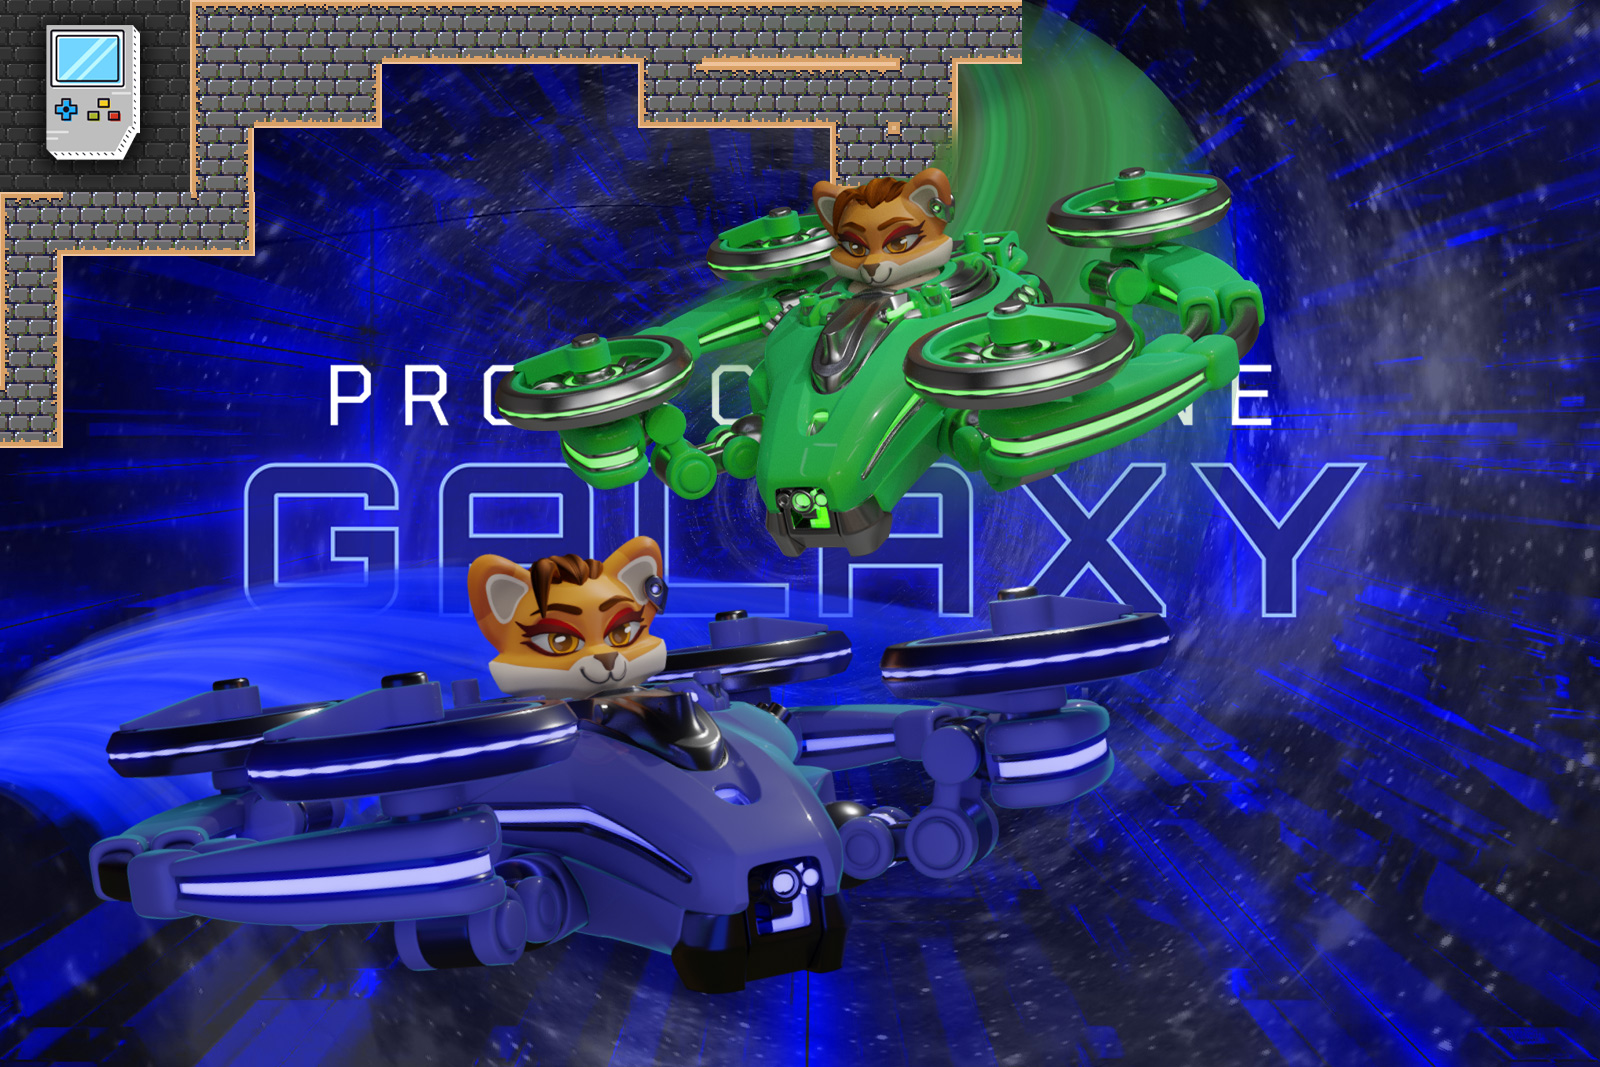 Project Drone Galaxy animal avatars flying drones.